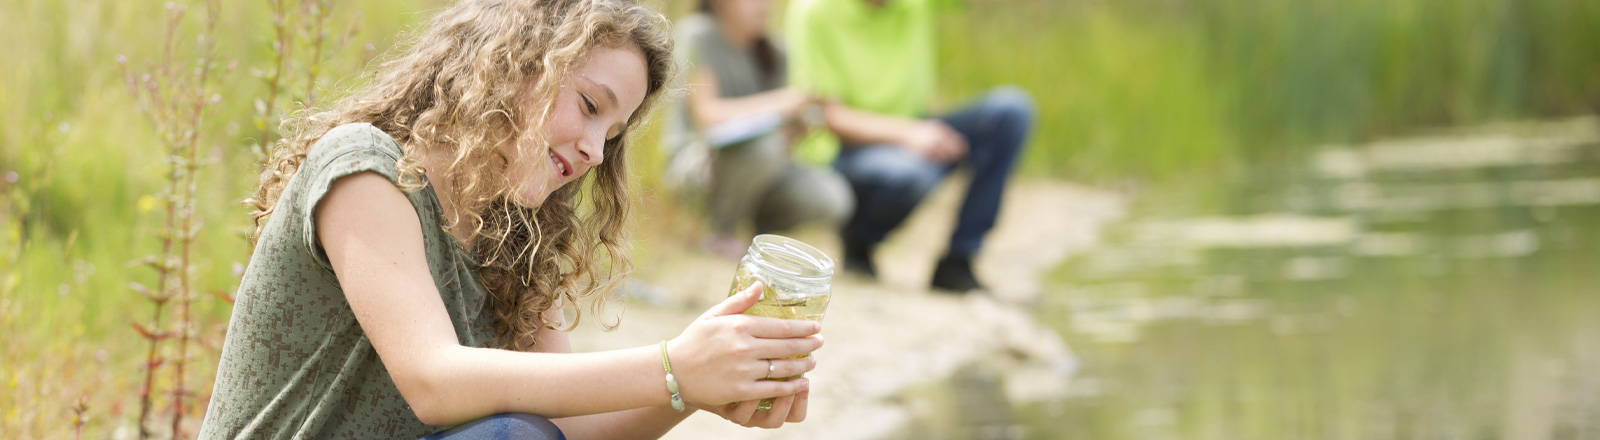 Photo of Child Collecting Samples Outdoors